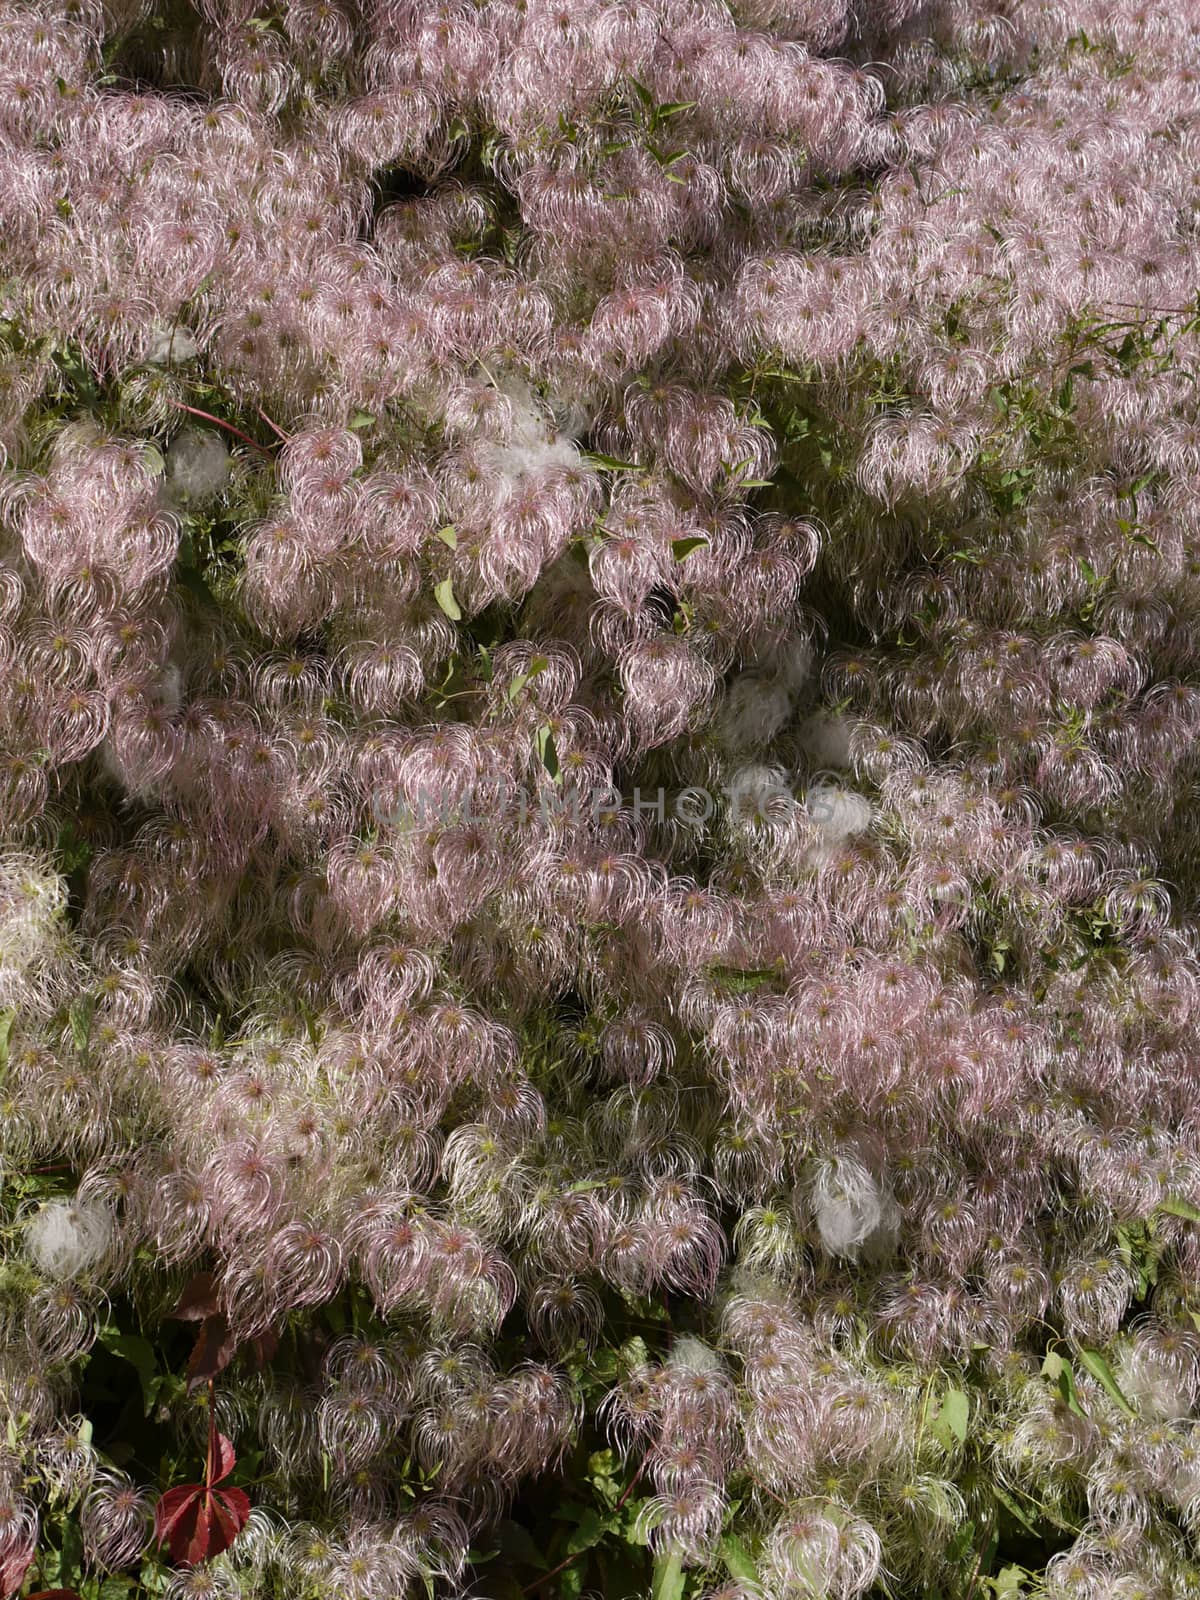 An unusual exotic plant with pink fluffy inflorescences, similar to hair